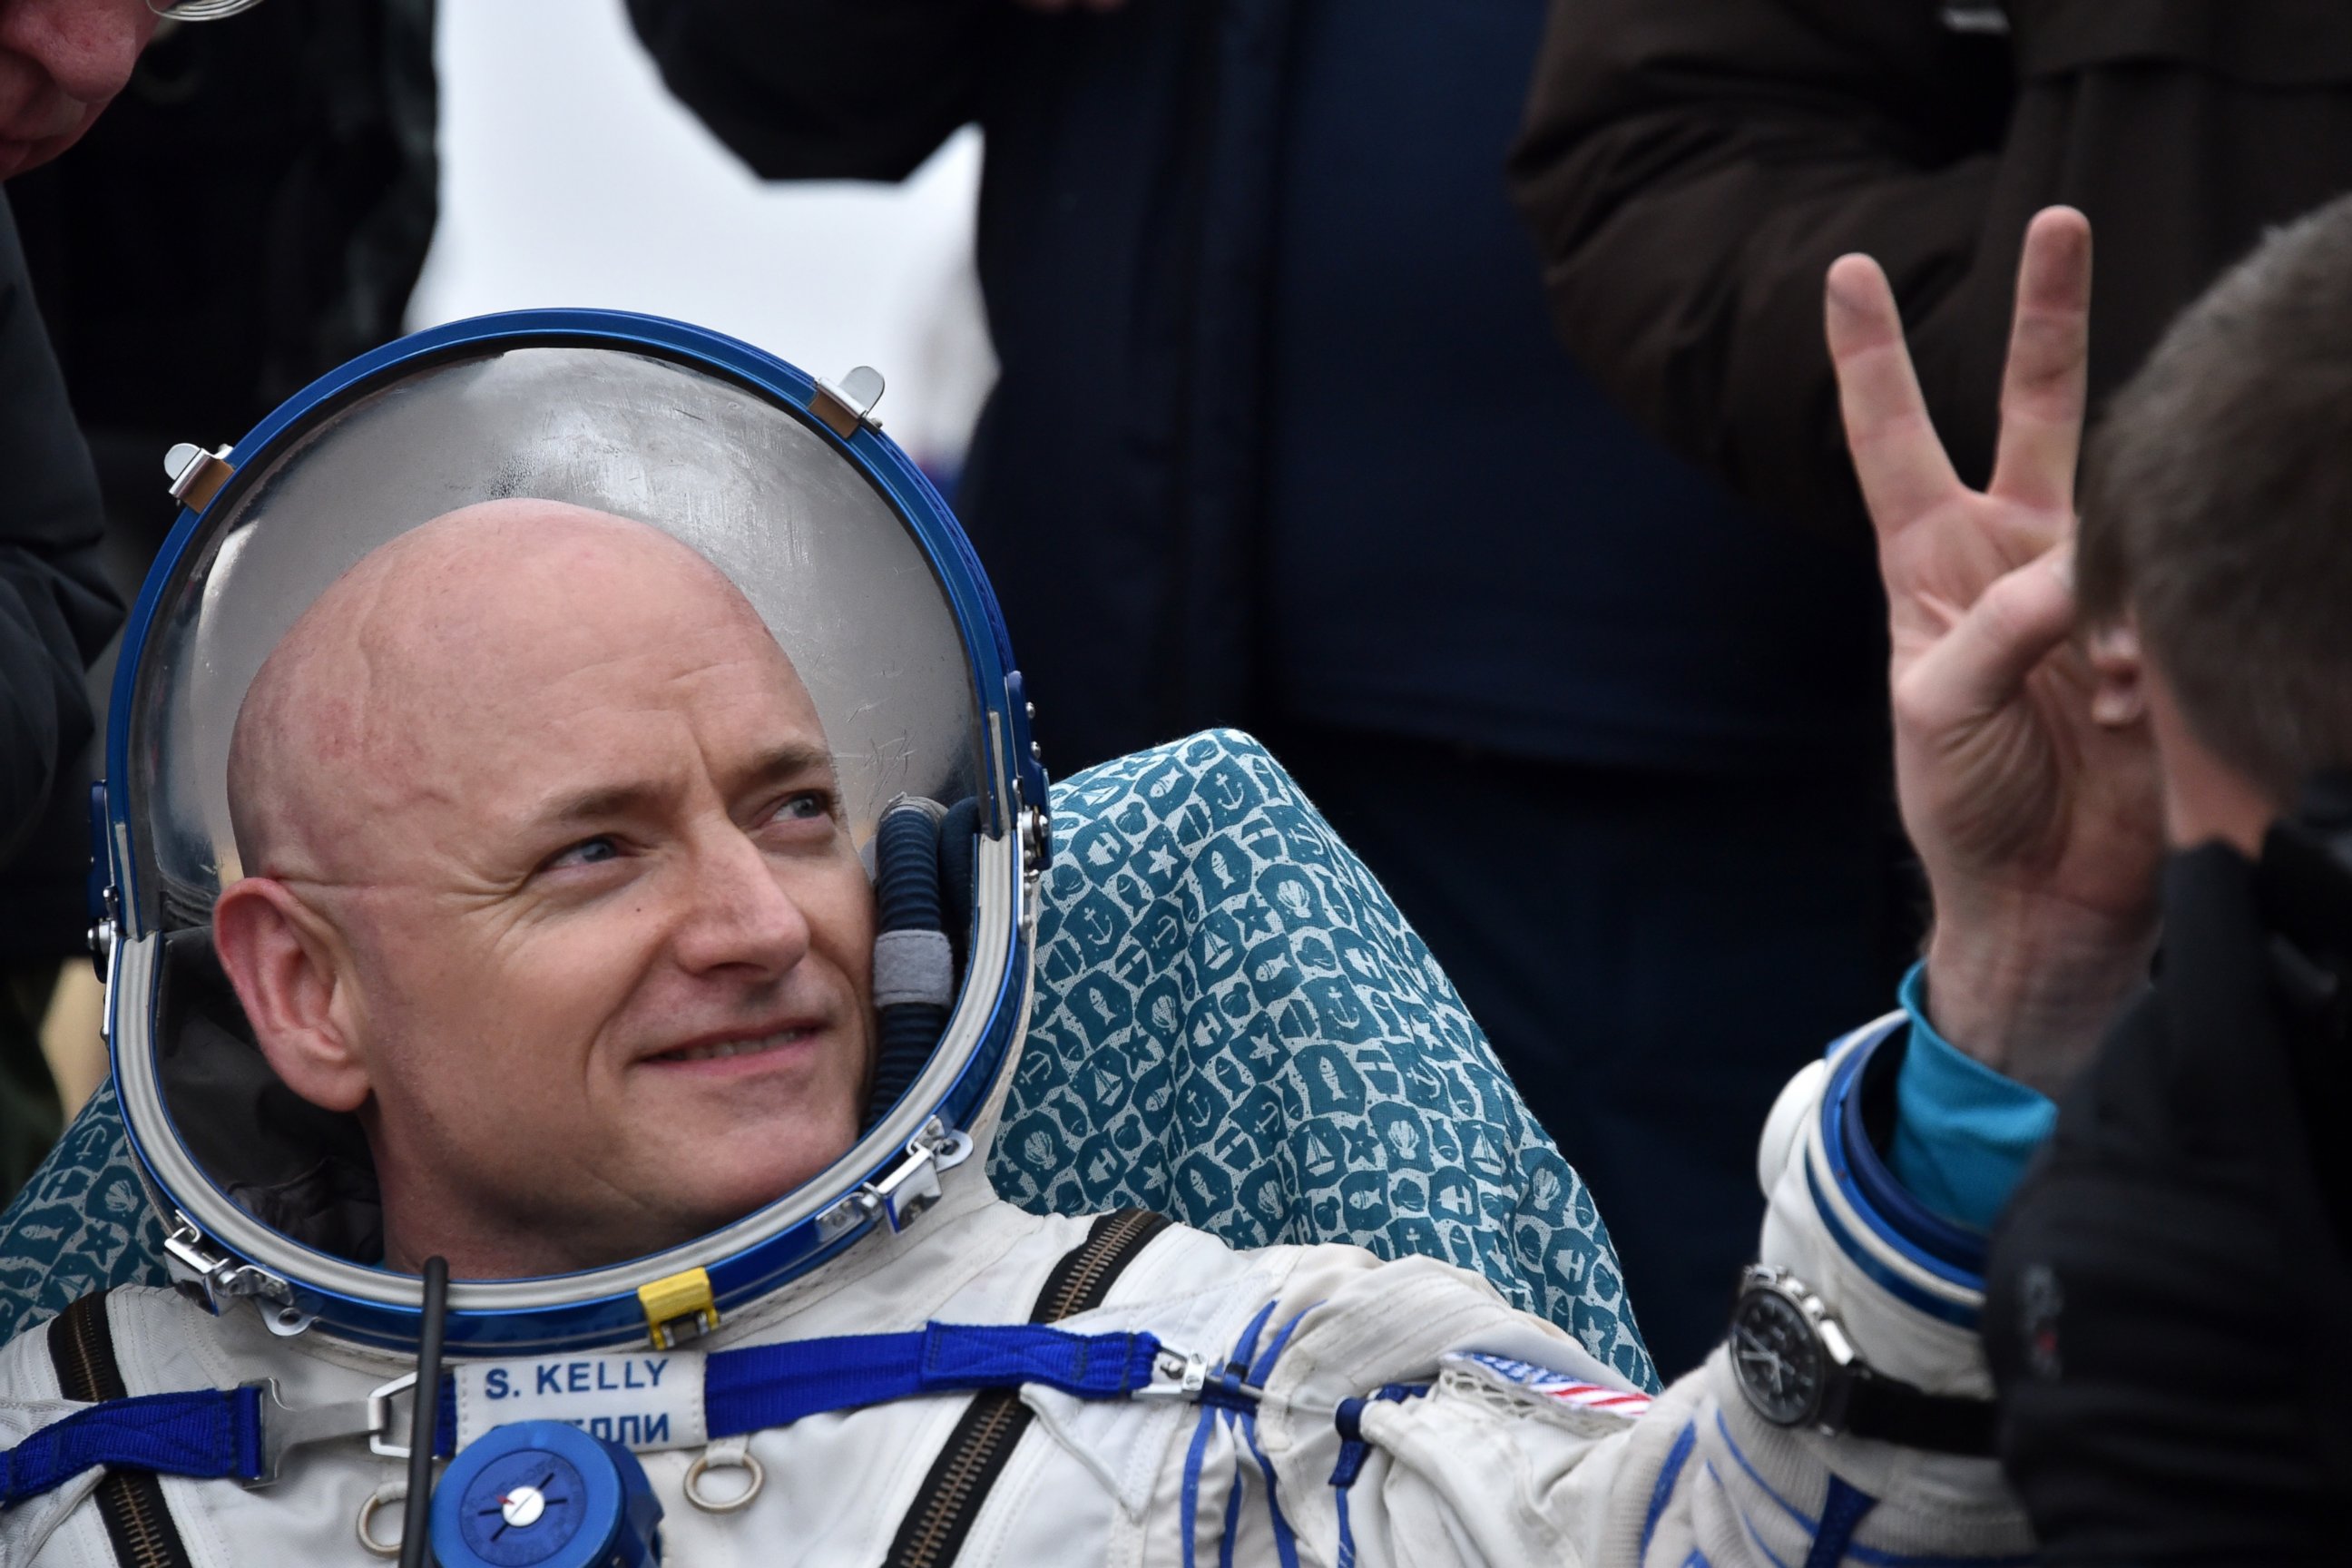 PHOTO: International Space Station (ISS) crew member Scott Kelly of the U.S. shows a victory sign after landing near the town of Dzhezkazgan, Kazakhstan, on March 2, 2016.